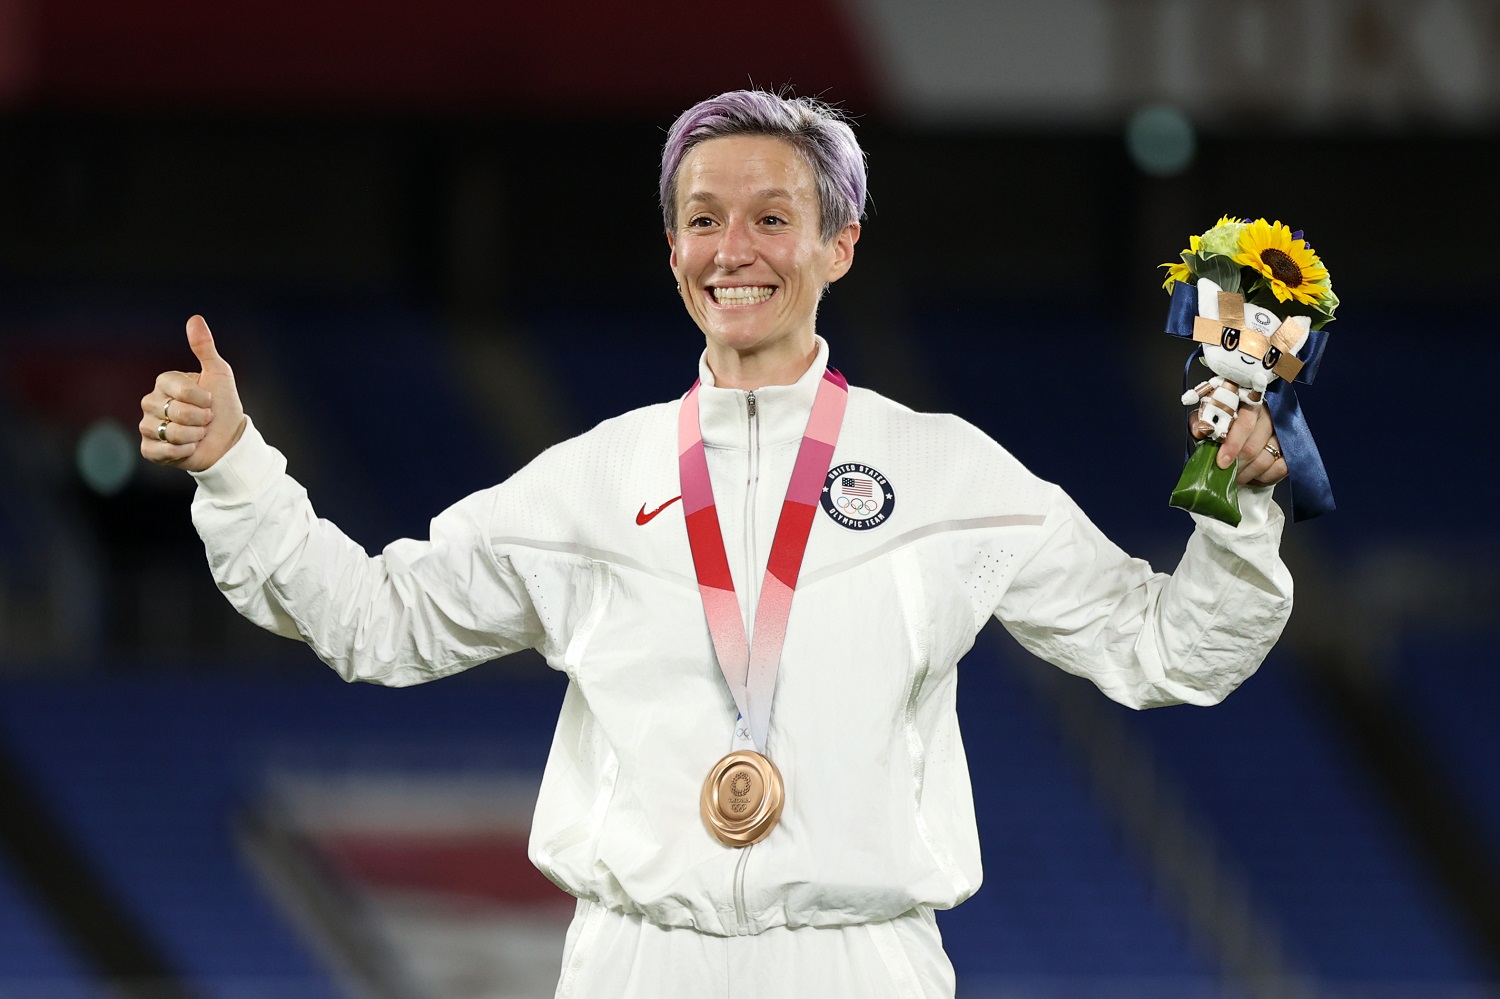 Megan Rapinoe reacts after receiving her bronze medal in the OLympic women's soccer tournament on Aug. 6, 2021.